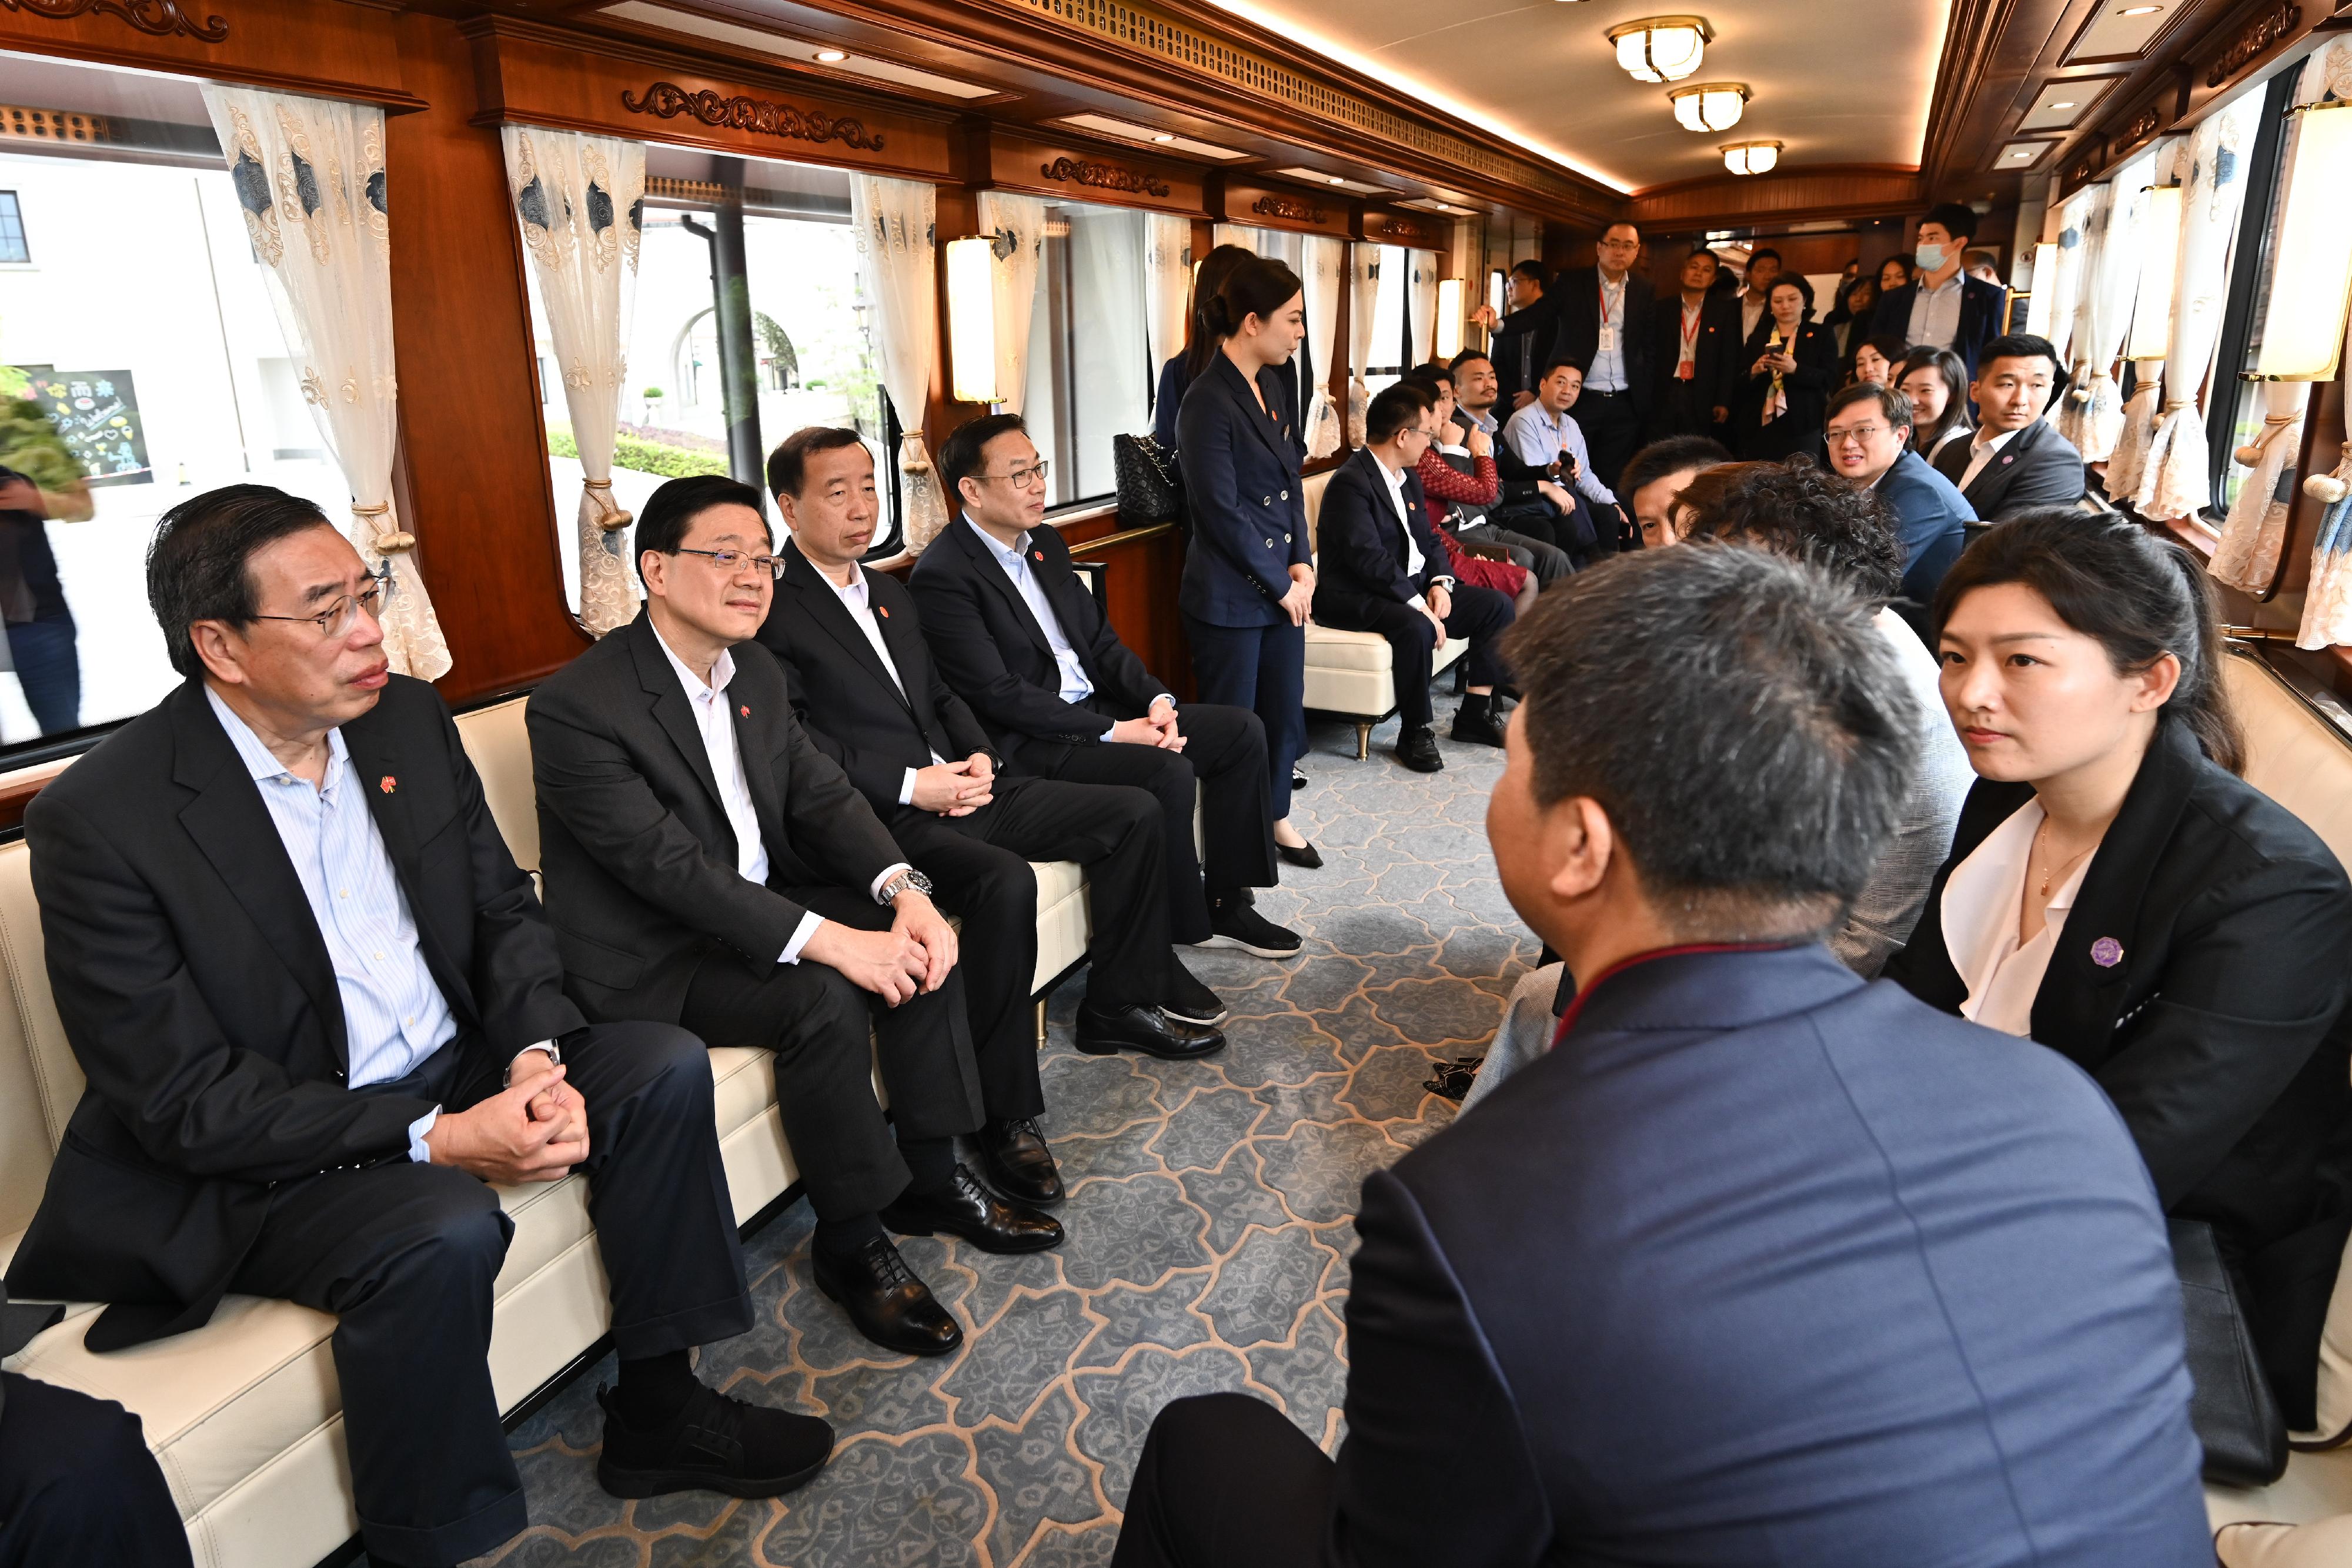 The Chief Executive, Mr John Lee, led a delegation of the Hong Kong Special Administrative Region Government and Legislative Council (LegCo) to visit Dongguan today (April 23). Photo shows (from left) the President of the LegCo, Mr Andrew Leung; Mr Lee; the Secretary of the CPC Dongguan Municipal Committee, Mr Xiao Yafei, and Deputy Director of the Liaison Office of the Central People's Government in the Hong Kong Special Administrative Region Mr He Jing, visiting the Huawei Ox Horn Campus by a small train.